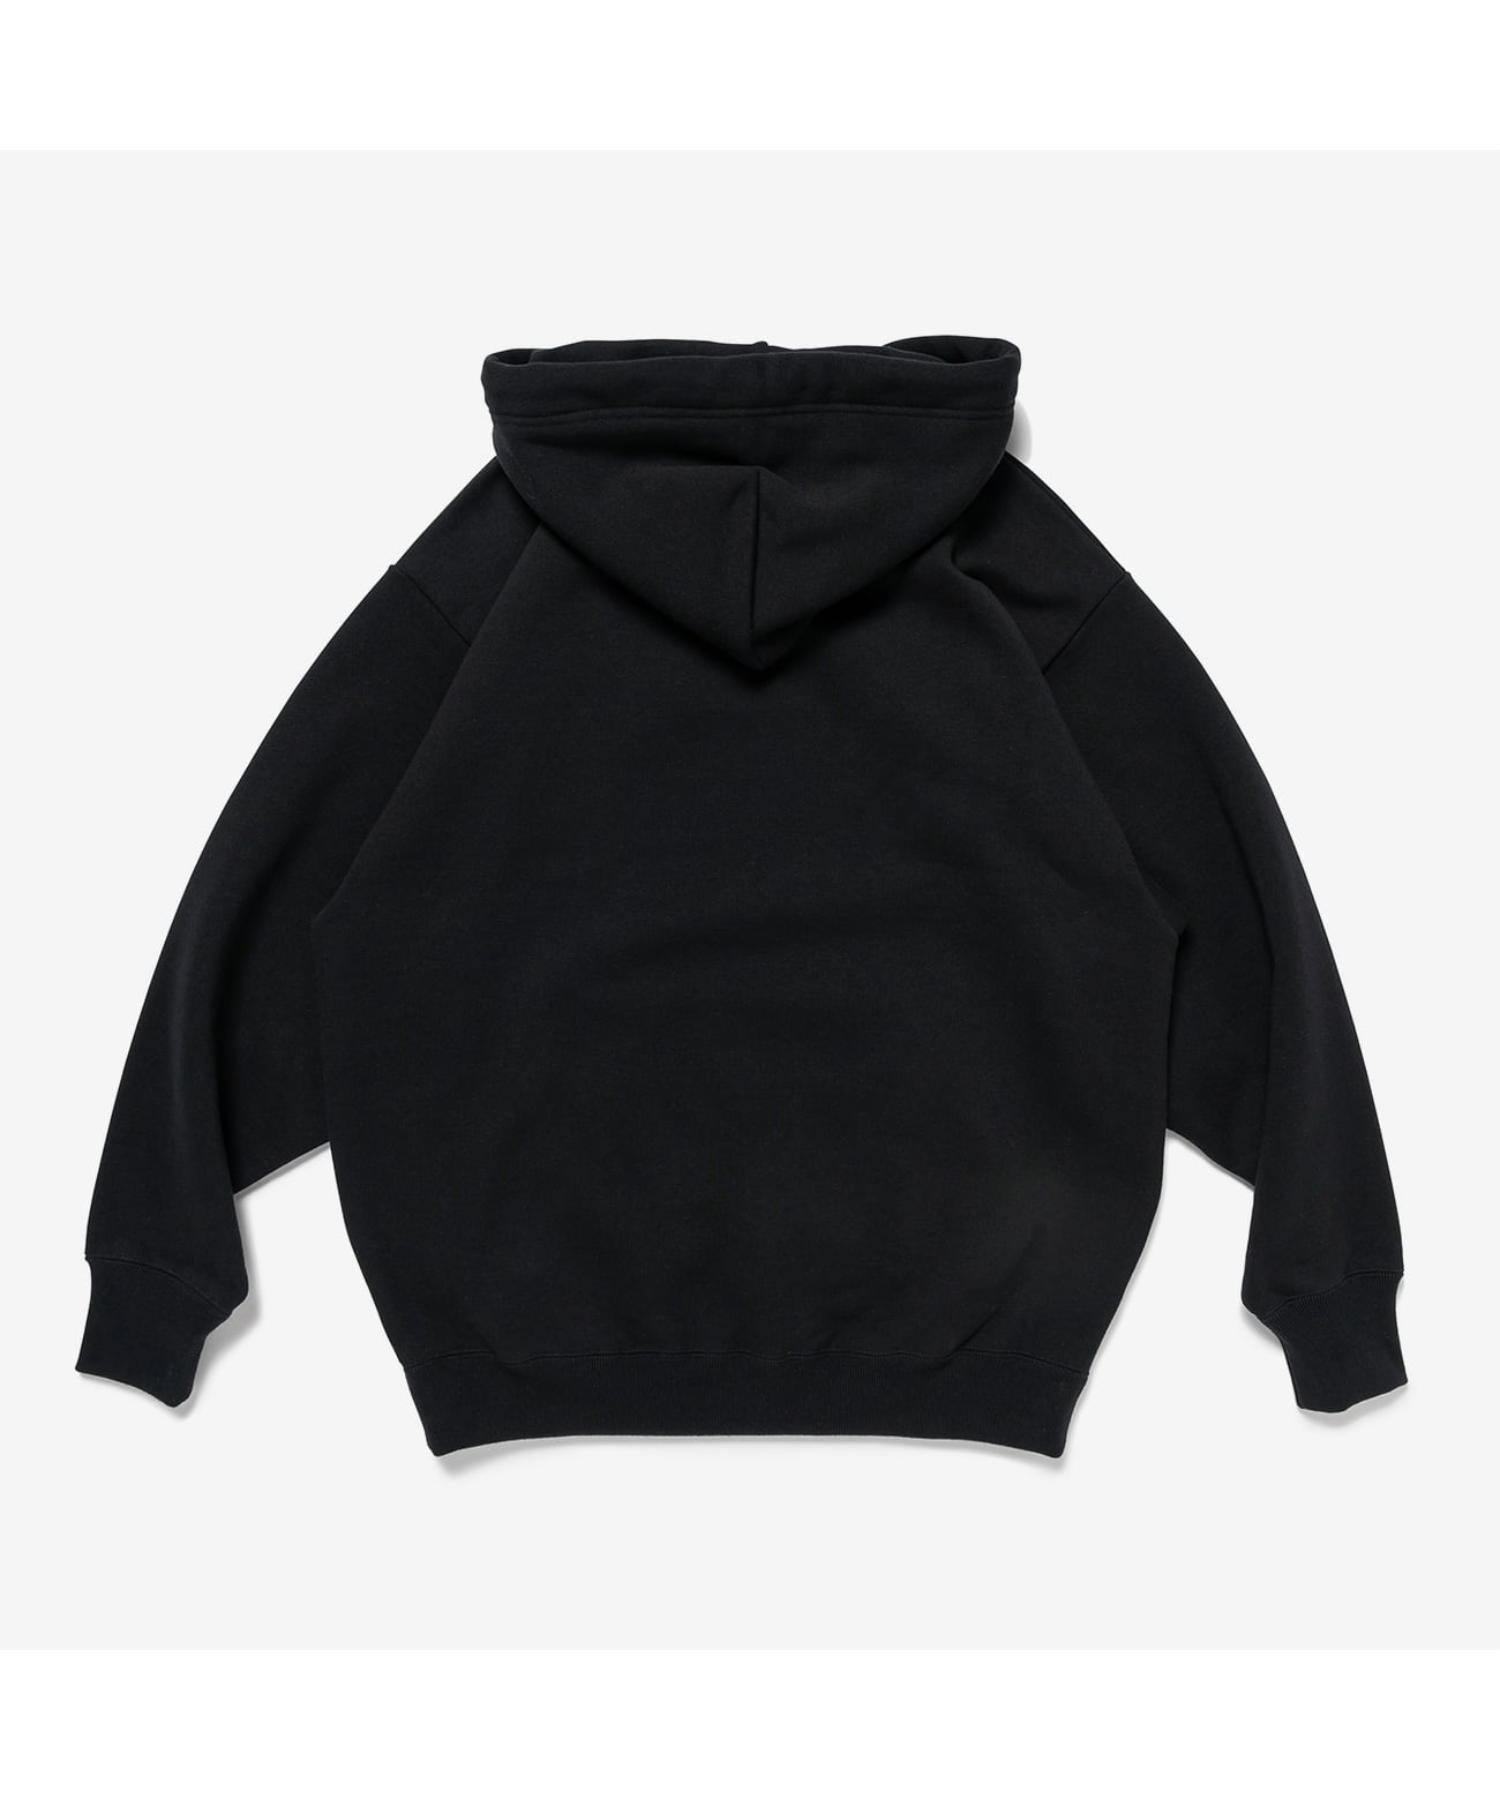 ACADEMY / HOODY / COTTON. COLLEGE - WTAPS (ダブルタップス) - tops 